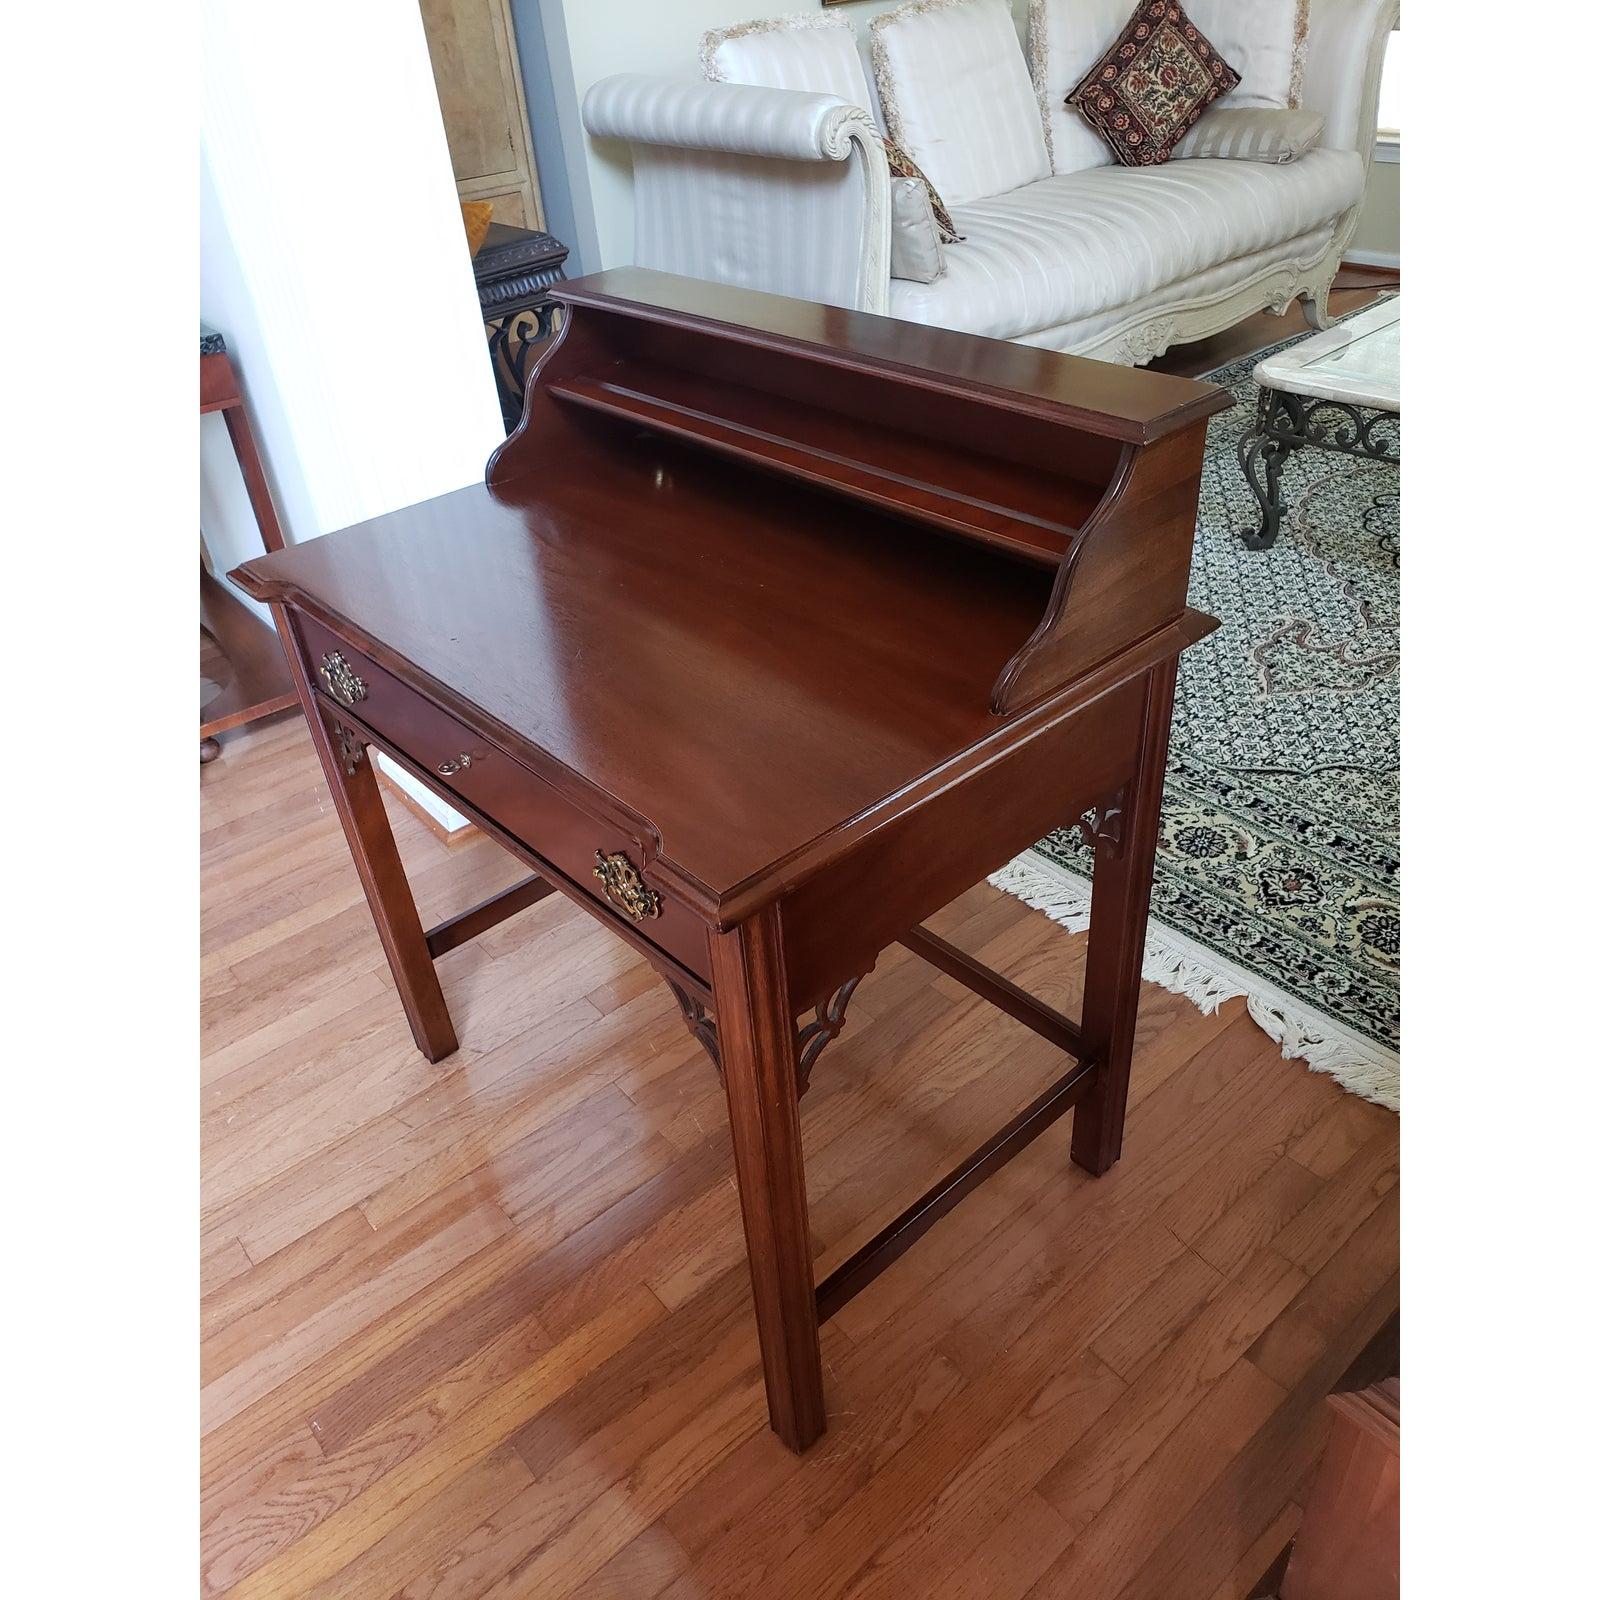 1960s National Mt Airy Mahogany Chippendale Writing Desk In Good Condition For Sale In Germantown, MD